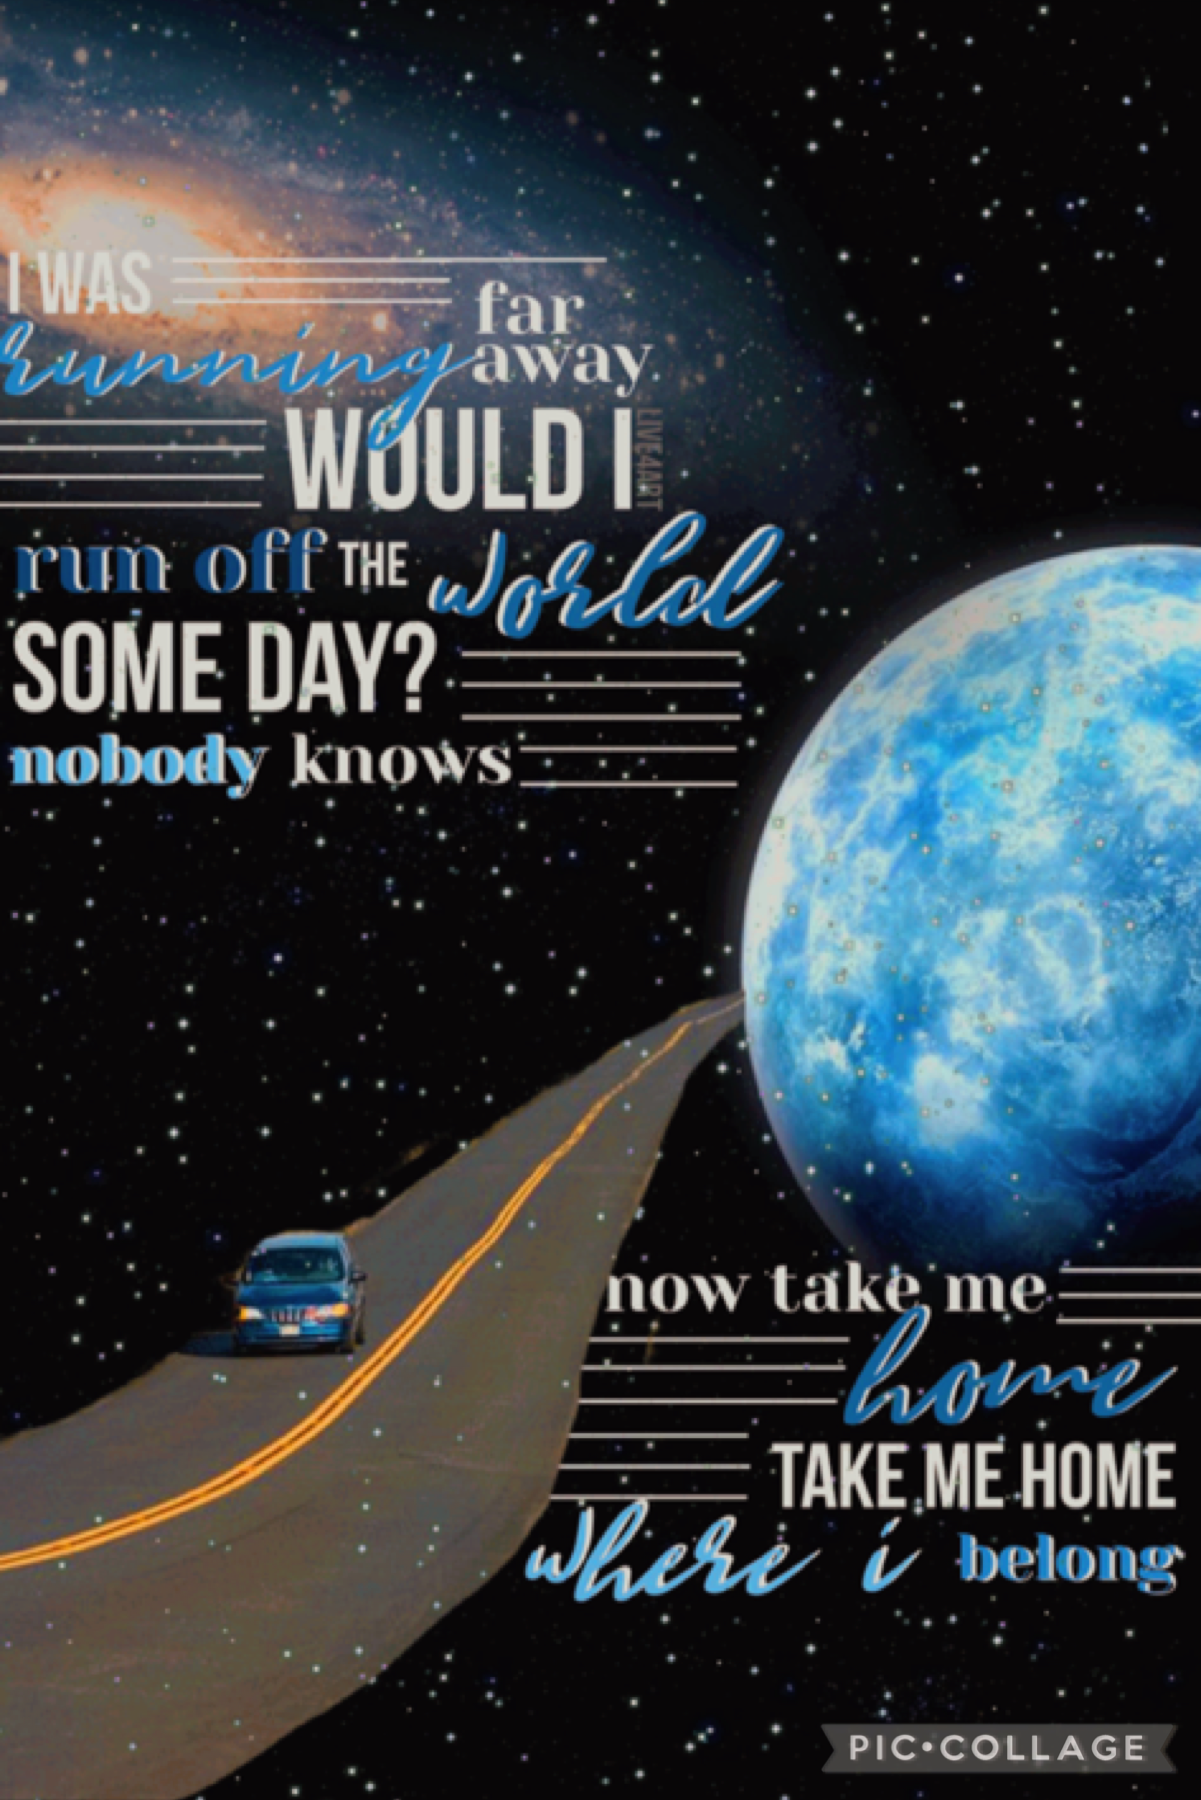 3.14.21 tap
lyrics from runaway by aurora
inspired by an edit i saw on instagram 
q: would you want to be an astronaut?
a: no, not until space travel is safer